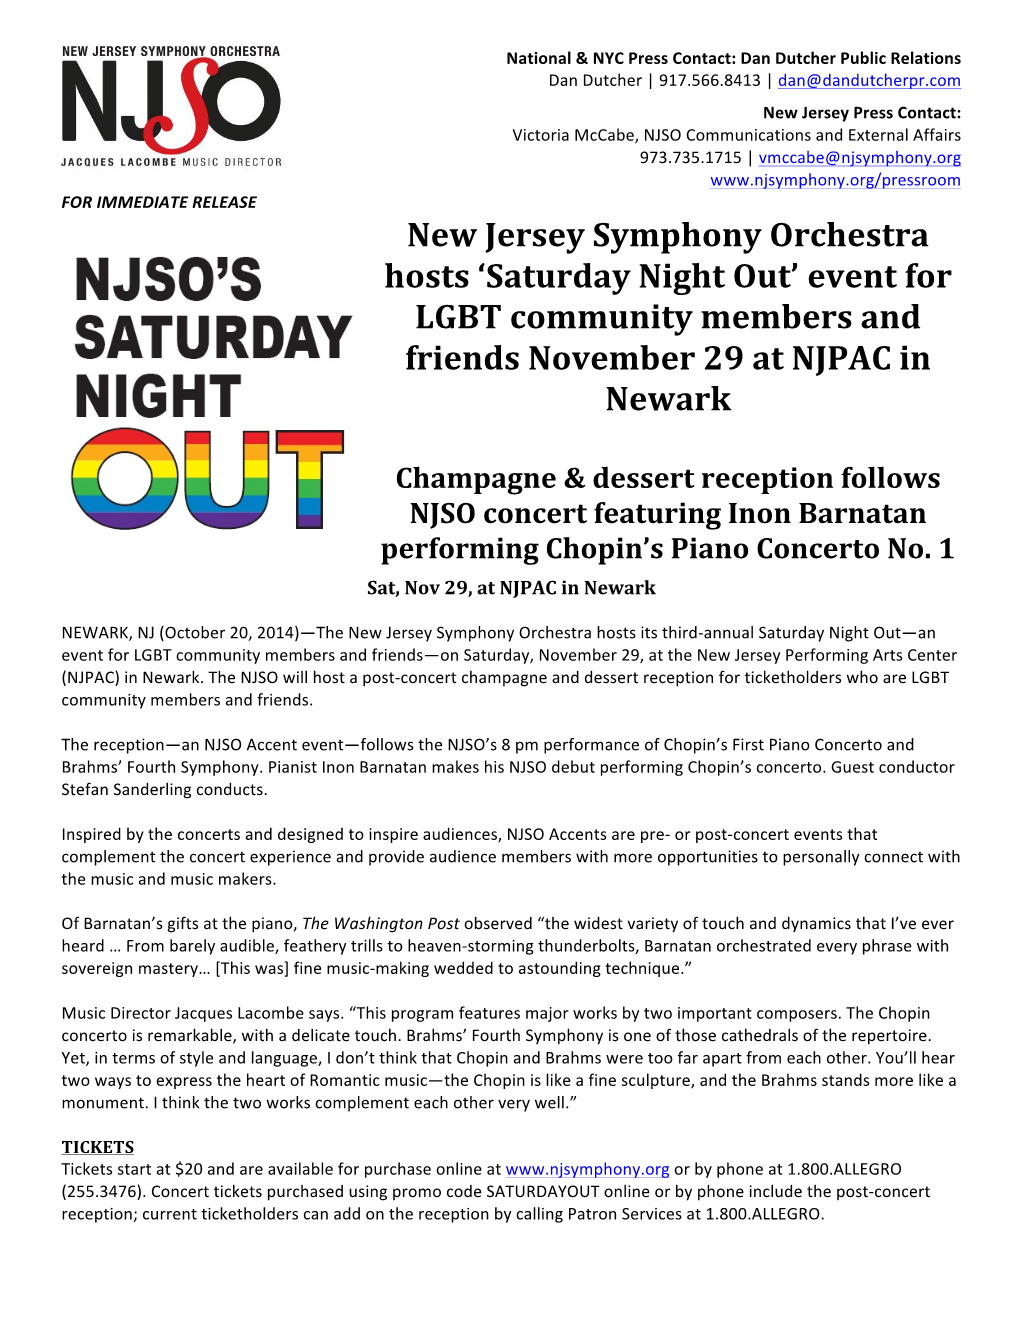 New Jersey Symphony Orchestra Hosts 'Saturday Night Out' Event